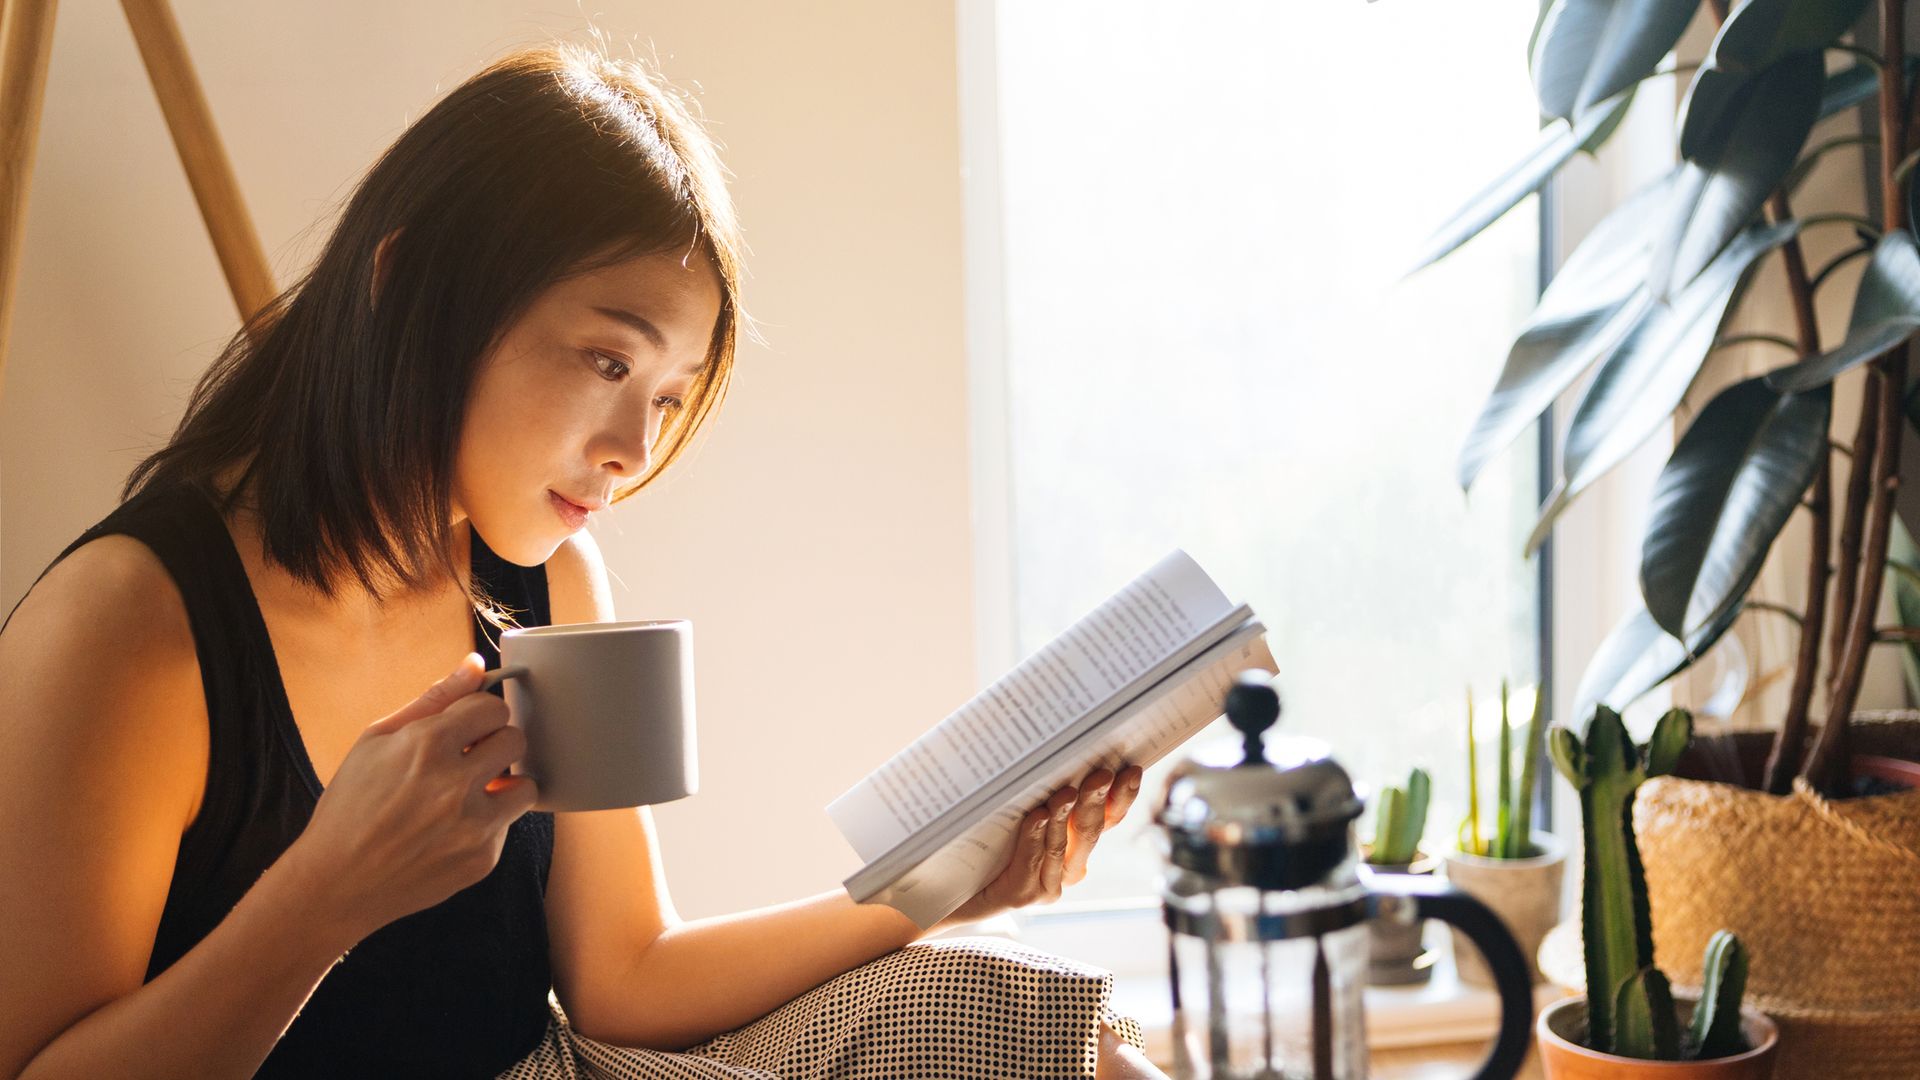 Beautiful young woman reading a book while drinking coffee, enjoying the morning sunlight.